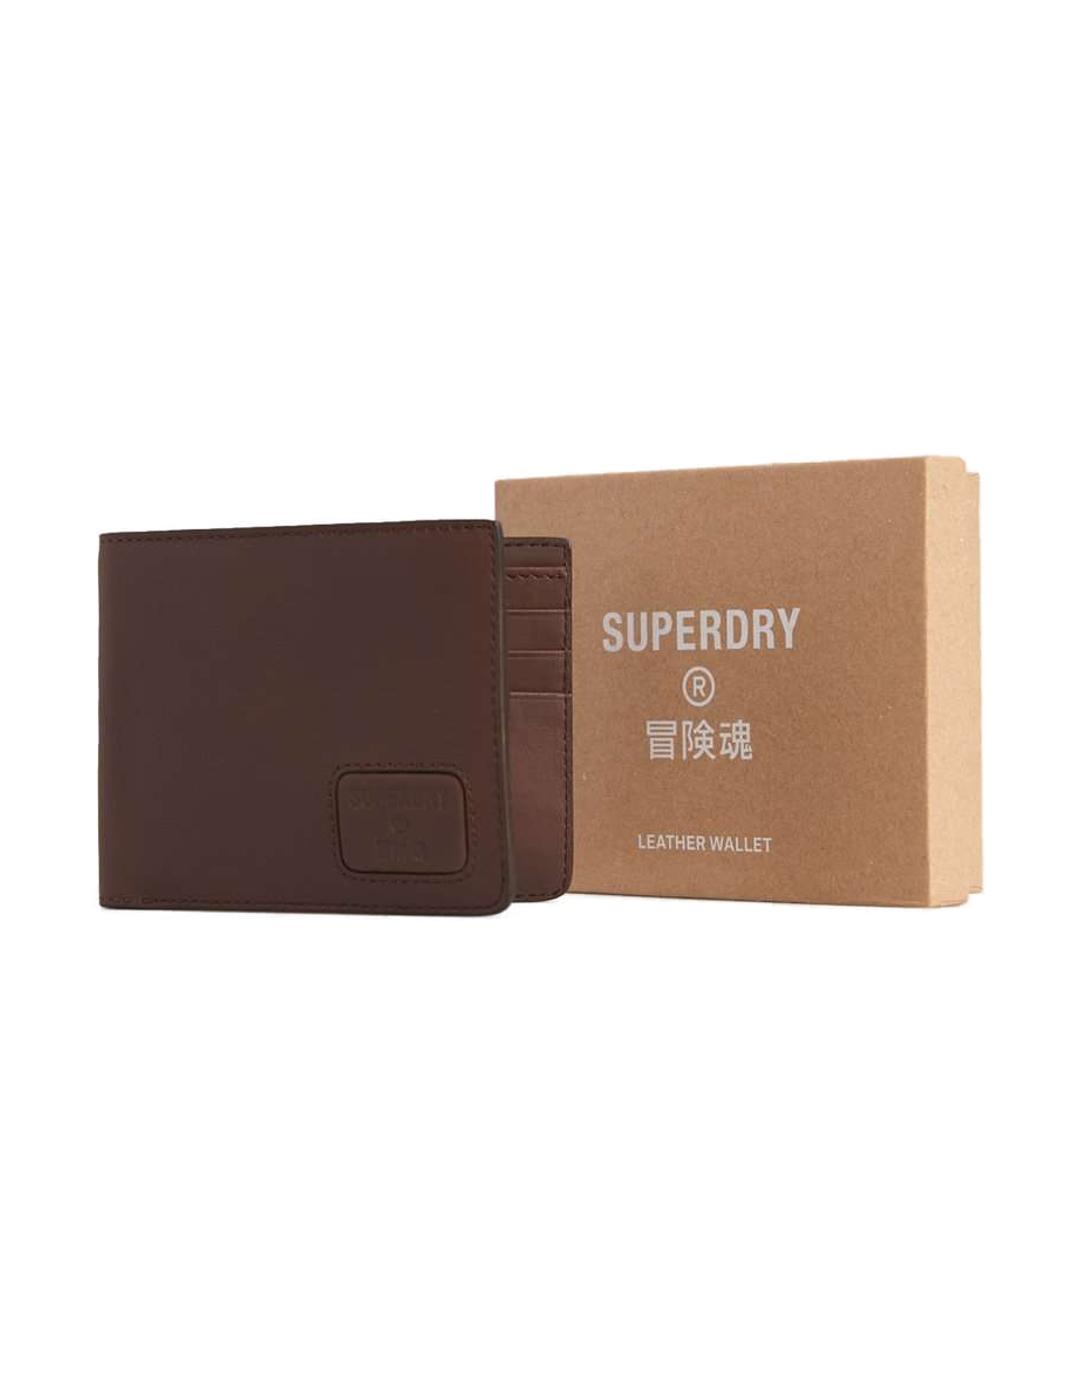 NYC BIFOLD LEATHER WALLET-Y